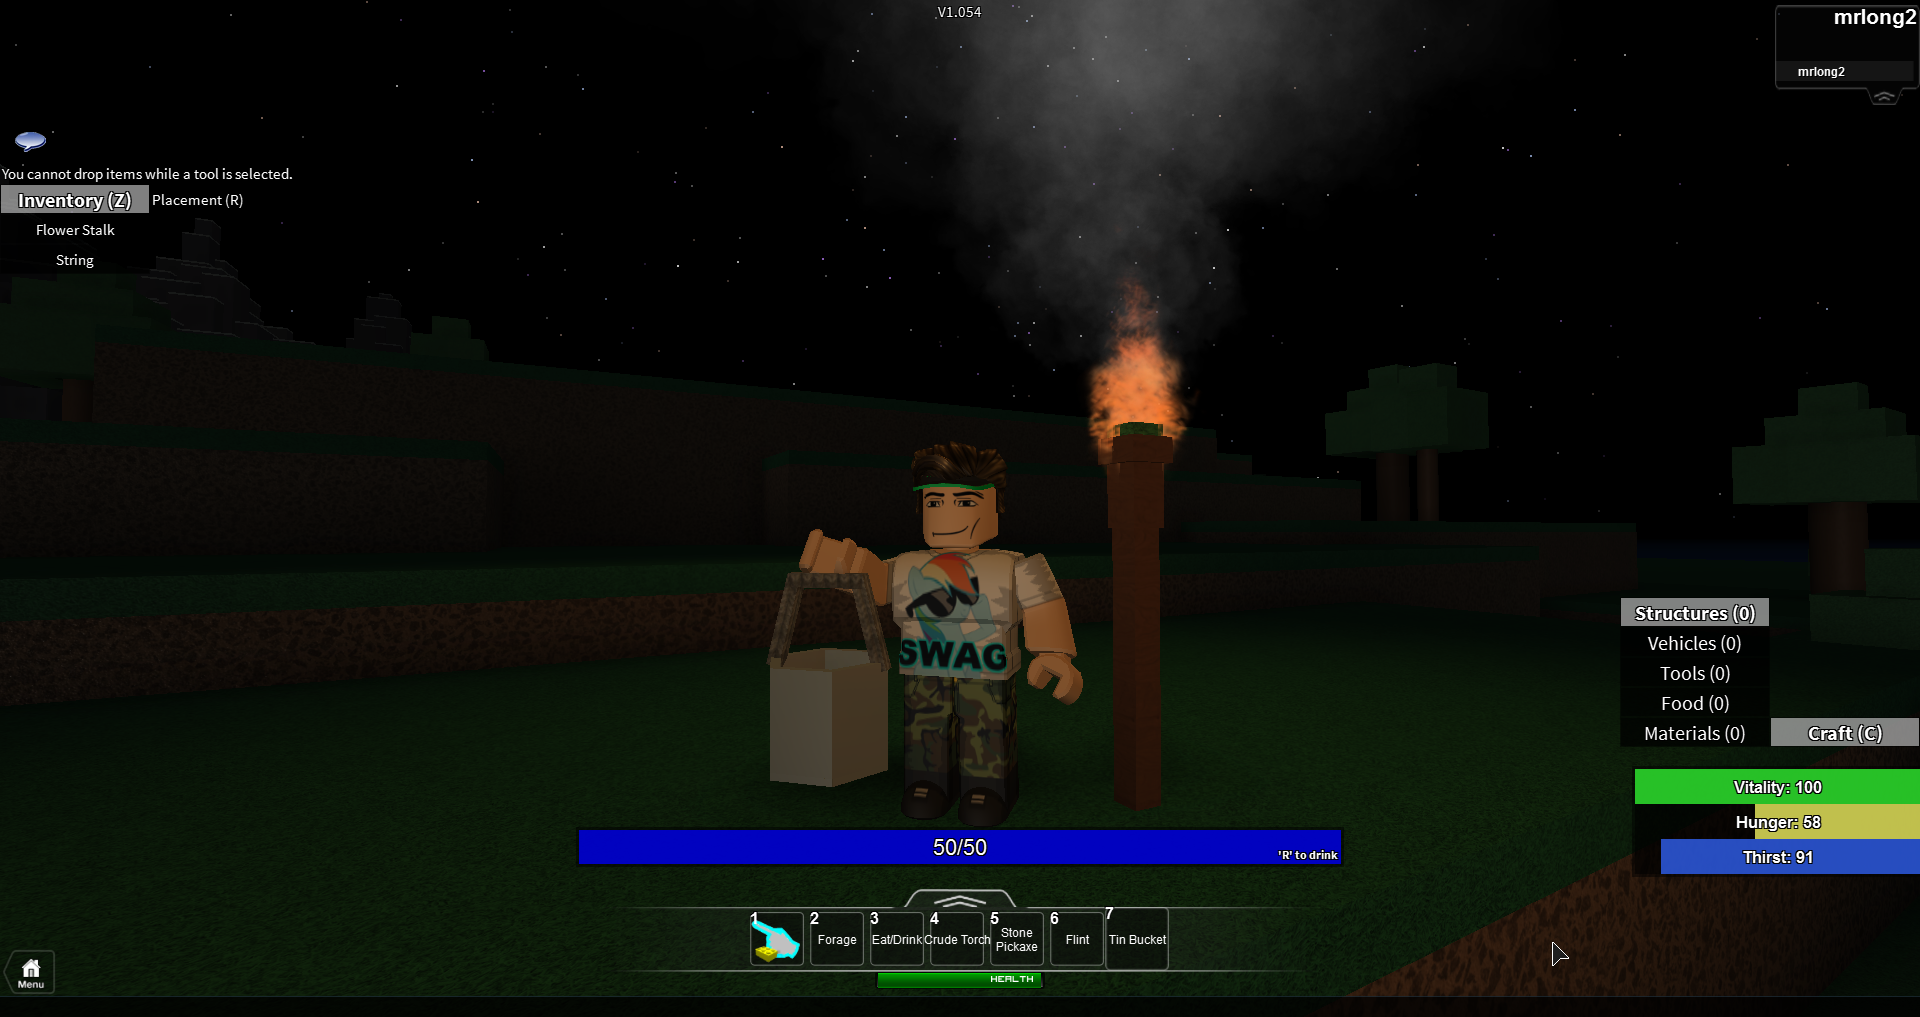 Roblox Survival Beginnings 2 Free Robux Promo Codes 2019 November Real Life - roblox survival beginnings wiki fandom powered by wikia